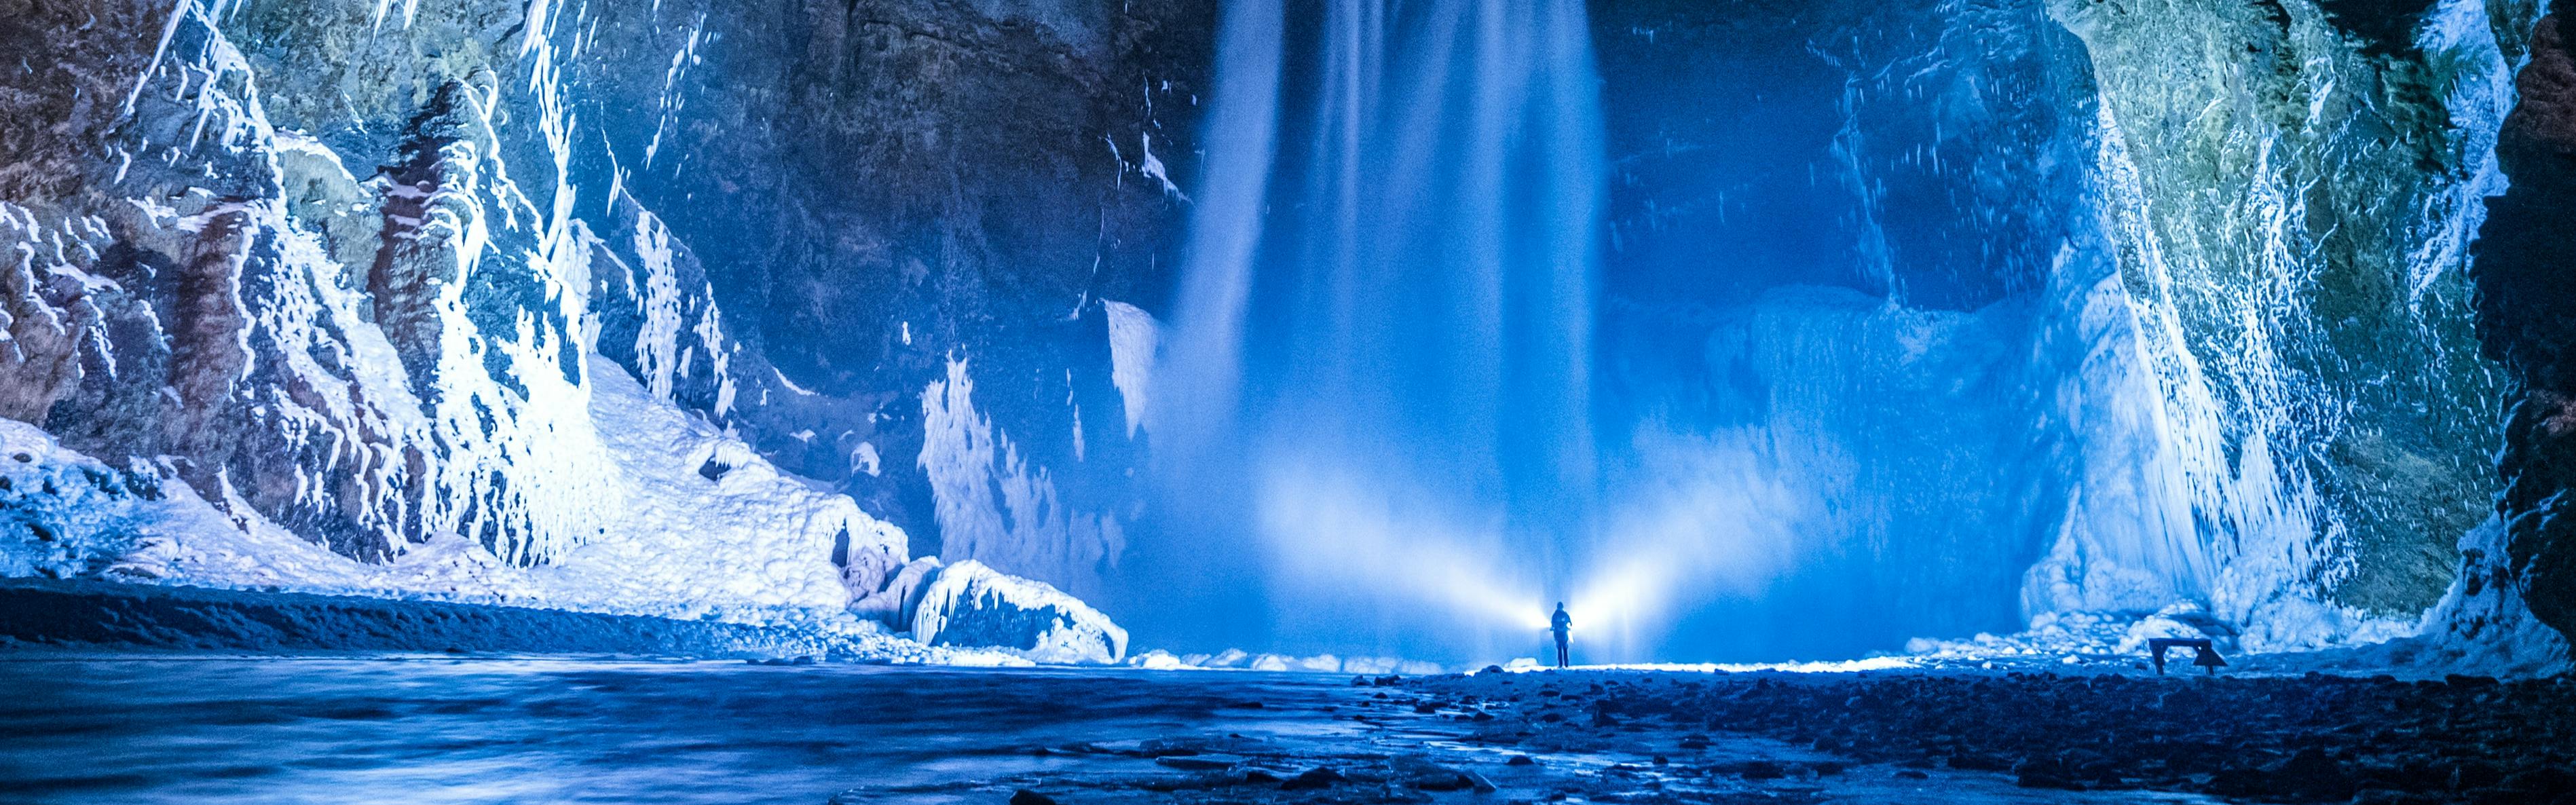 A dramatically lit waterfall at night, a person standing in front of the falls in the distance